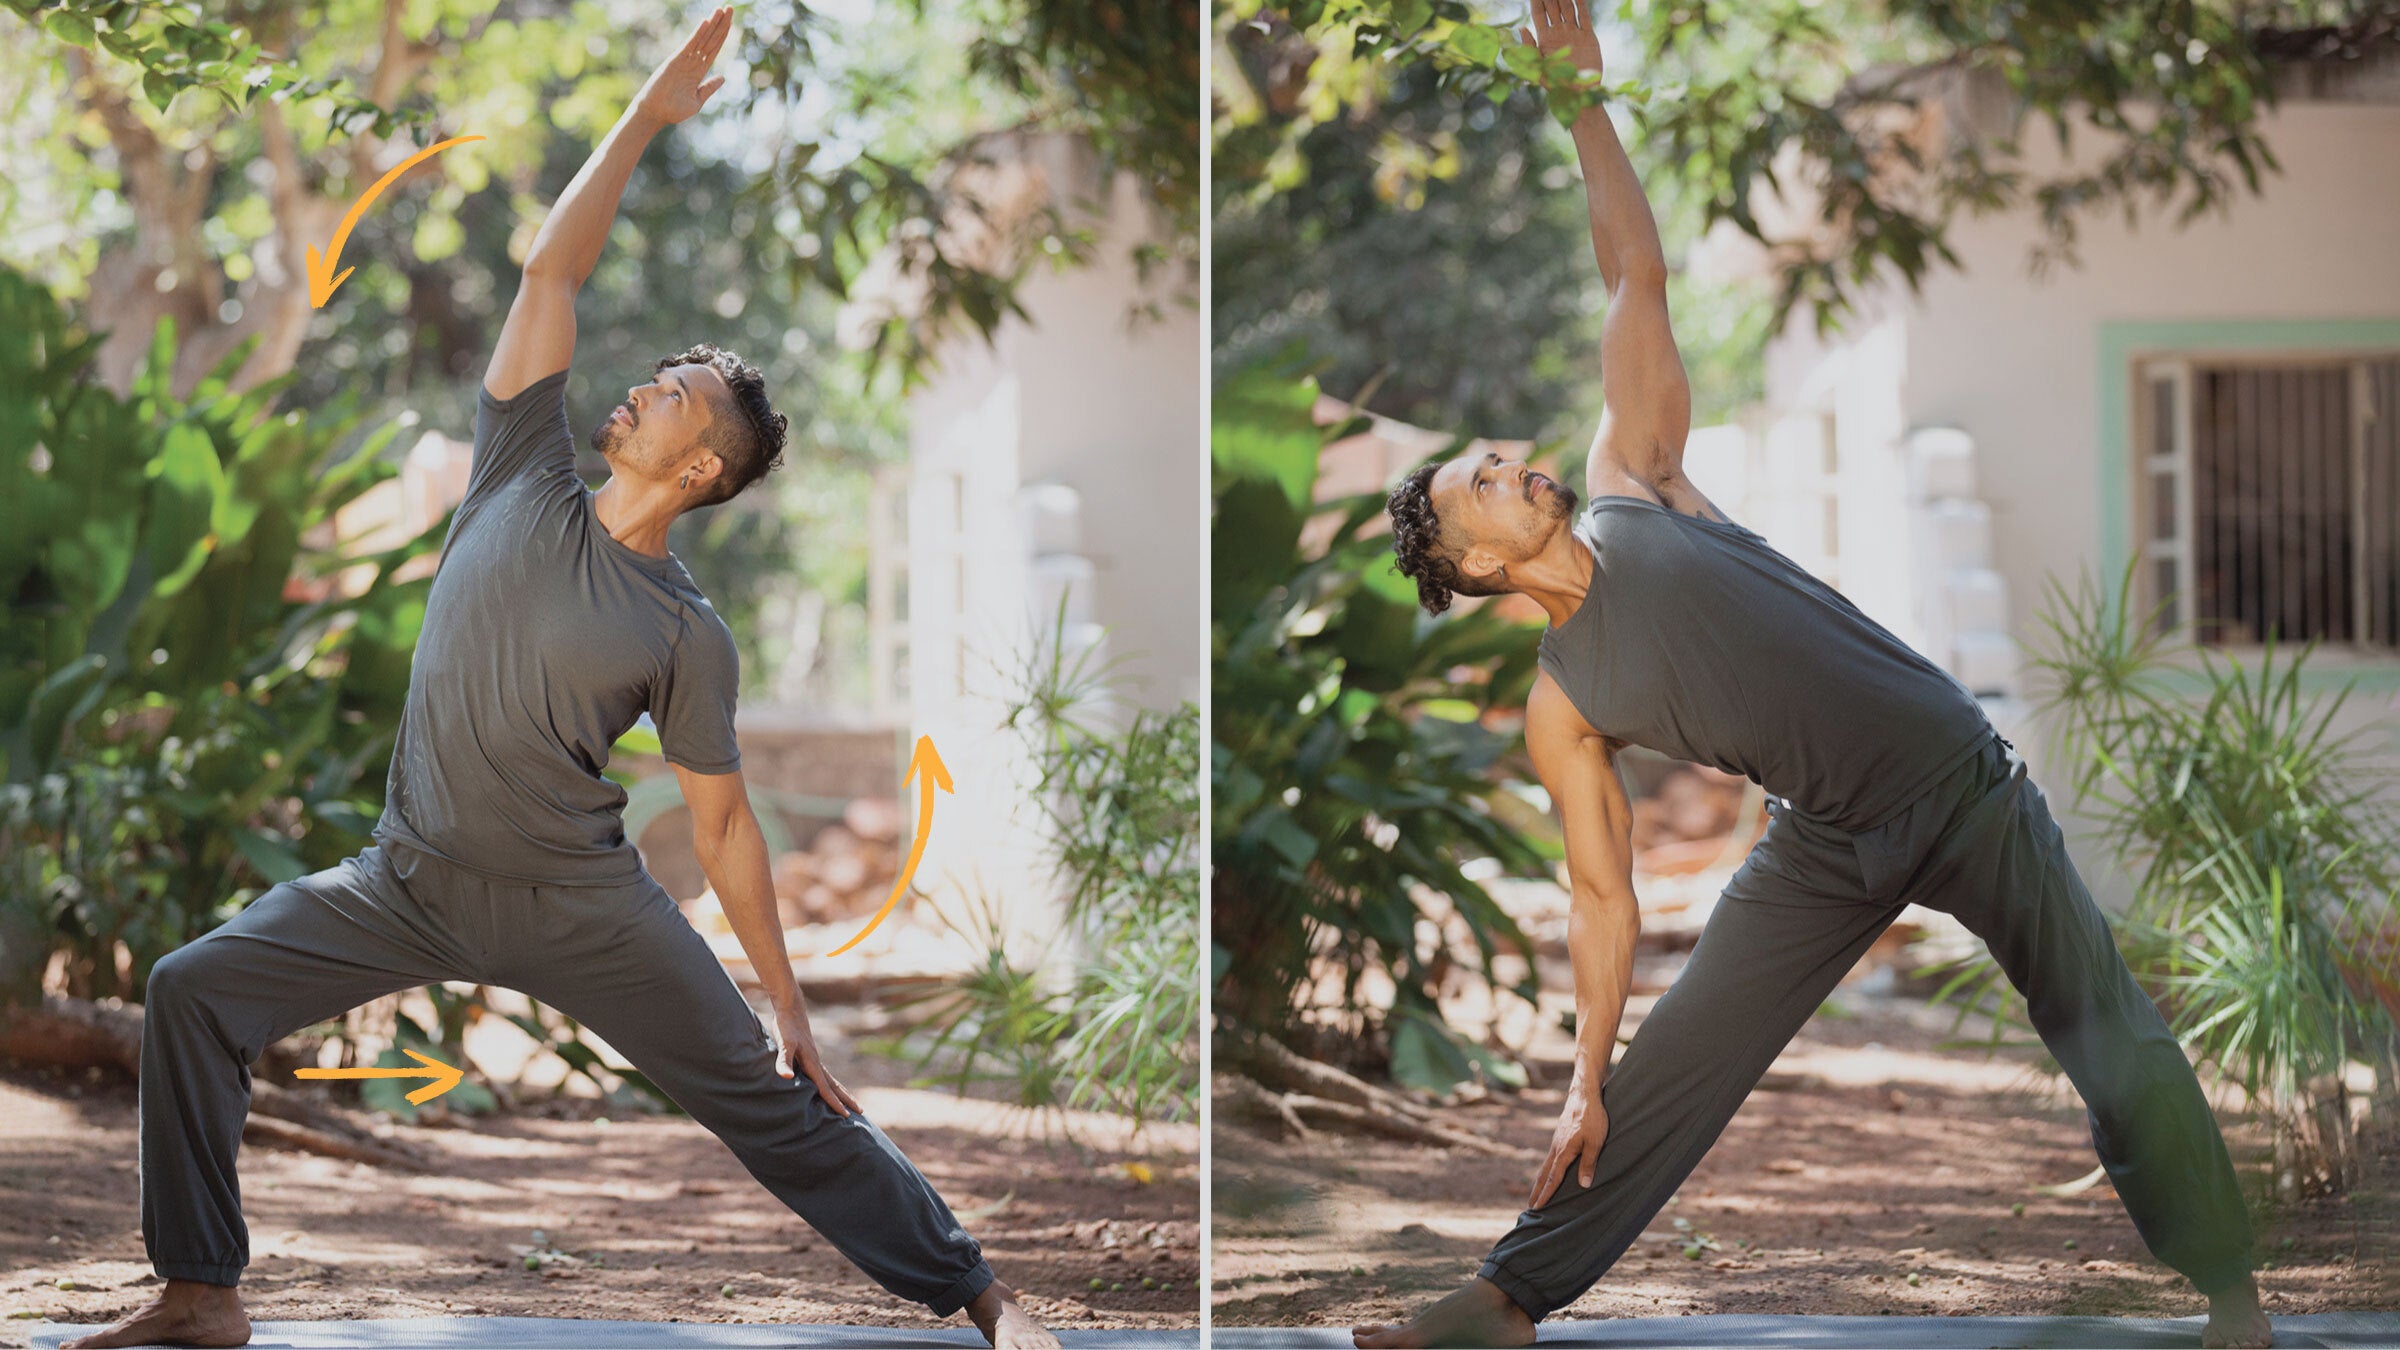 Kriya Yoga Studio - 🧘‍♀️ Morning Yoga Poses for Beginners 👉Triangle Pose  👉Deep lunge 👉Forward Bend 👉Elbow Plank 👉Garland Pose 👉Upward Dog  👉Pigeon Pose Join our yoga classes for in-depth learning and